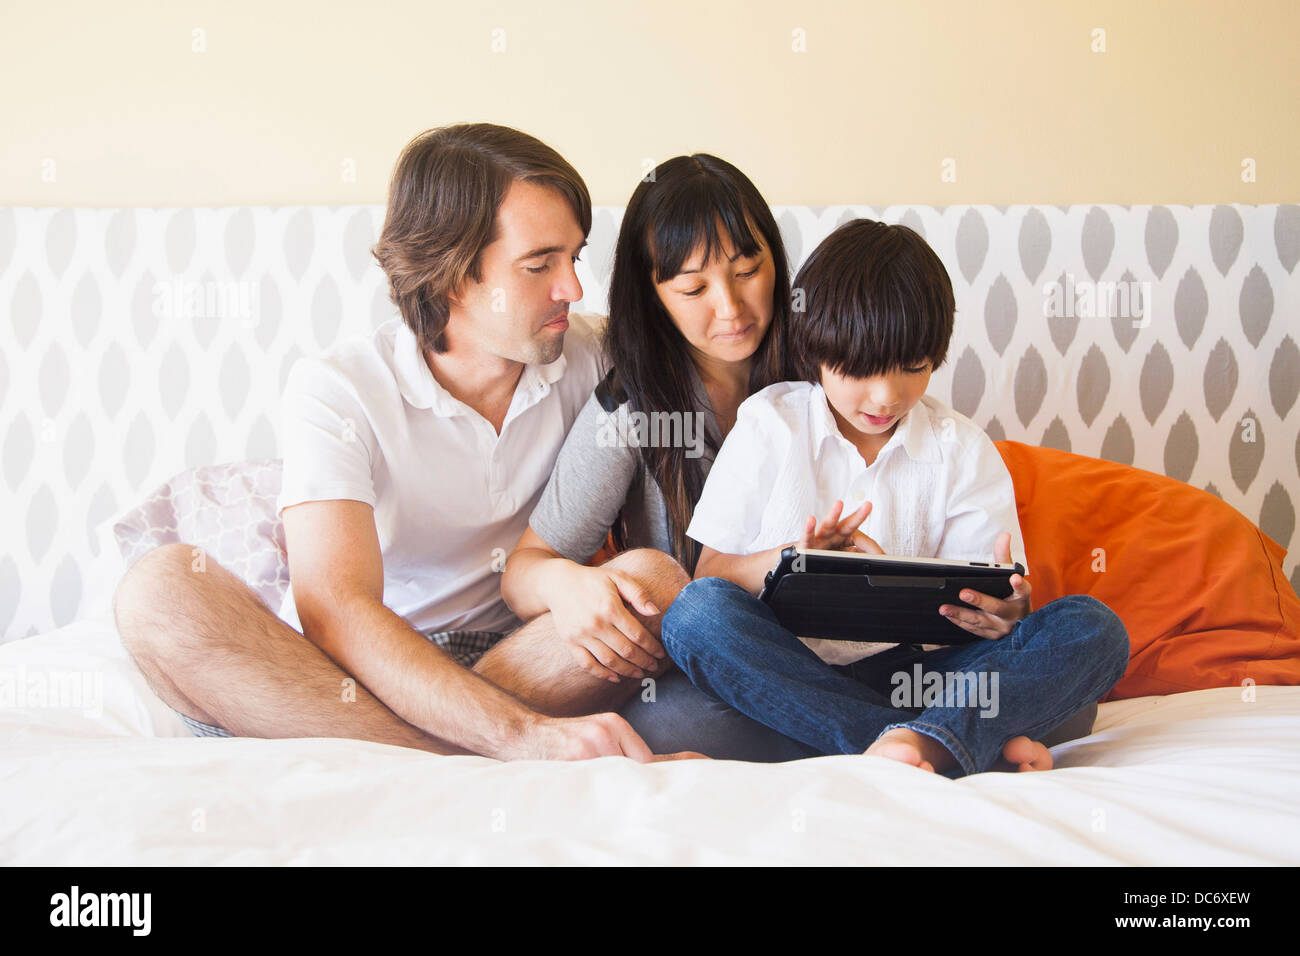 Portrait of family sitting on bed Stock Photo